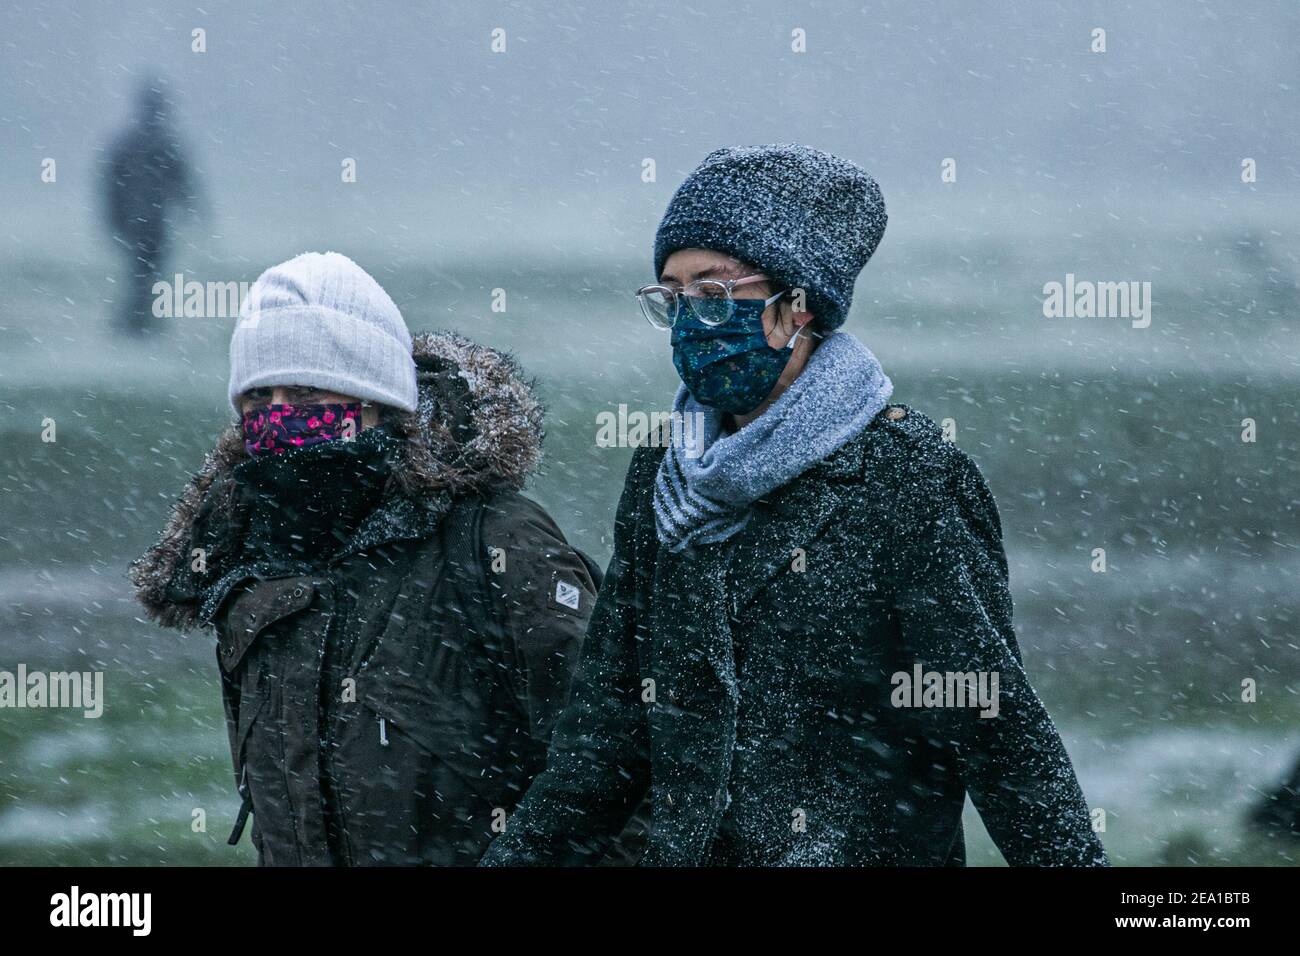 Wimbledon London Uk 7 February 21 People Wear Facemarks During A Snow Shower On Wimbledon Common As Storm Darcy Hits The Uk This Morning With Freezing Temperatures The Met Office Has Issued